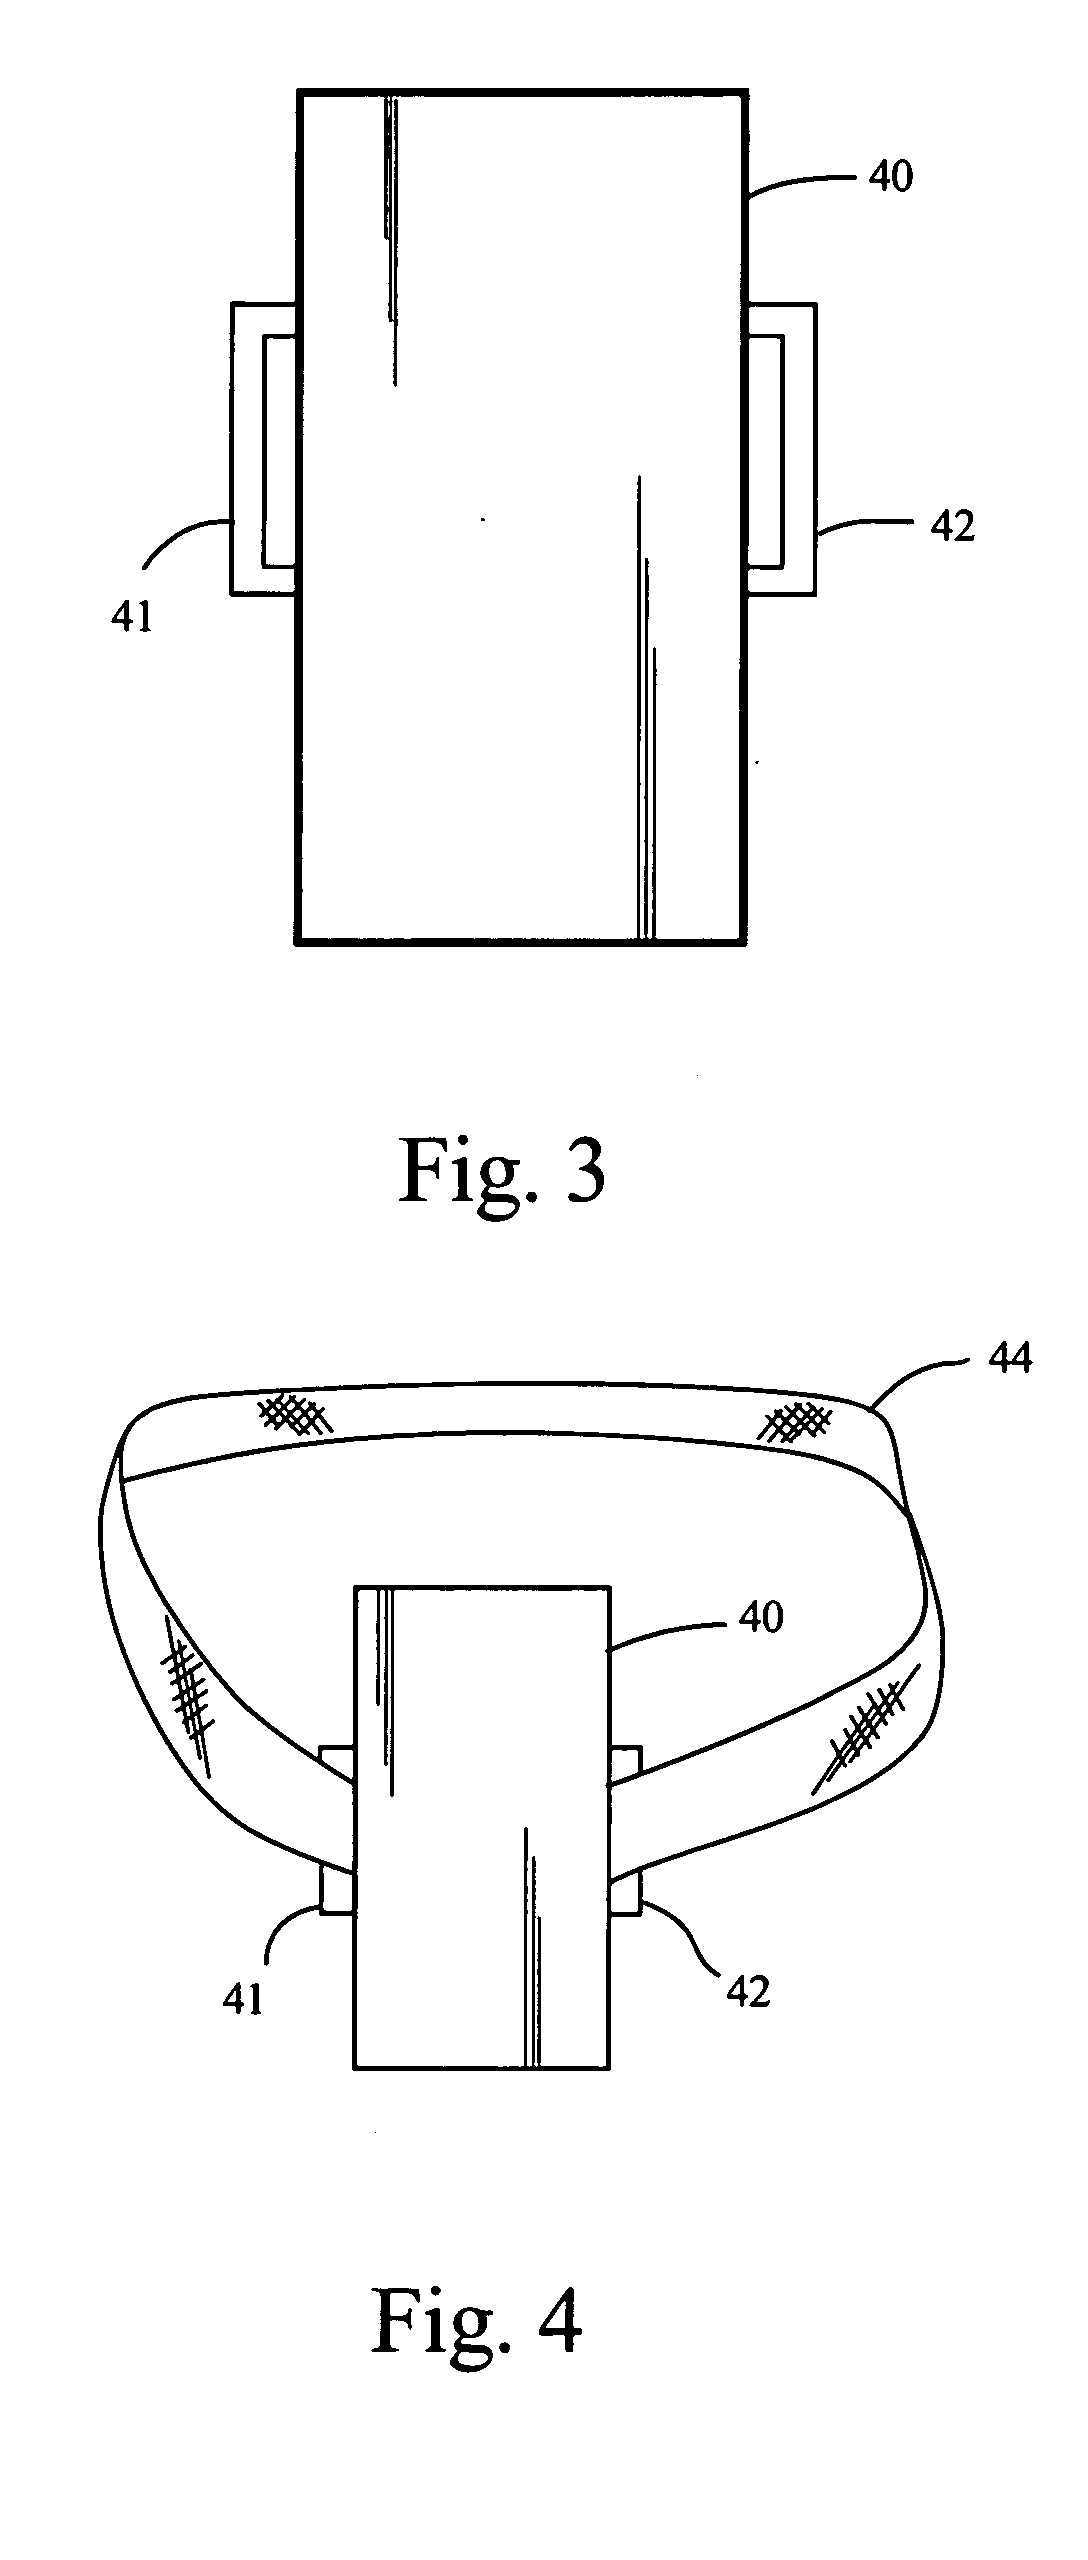 Partially implantable system for the electrical treatment of cancer